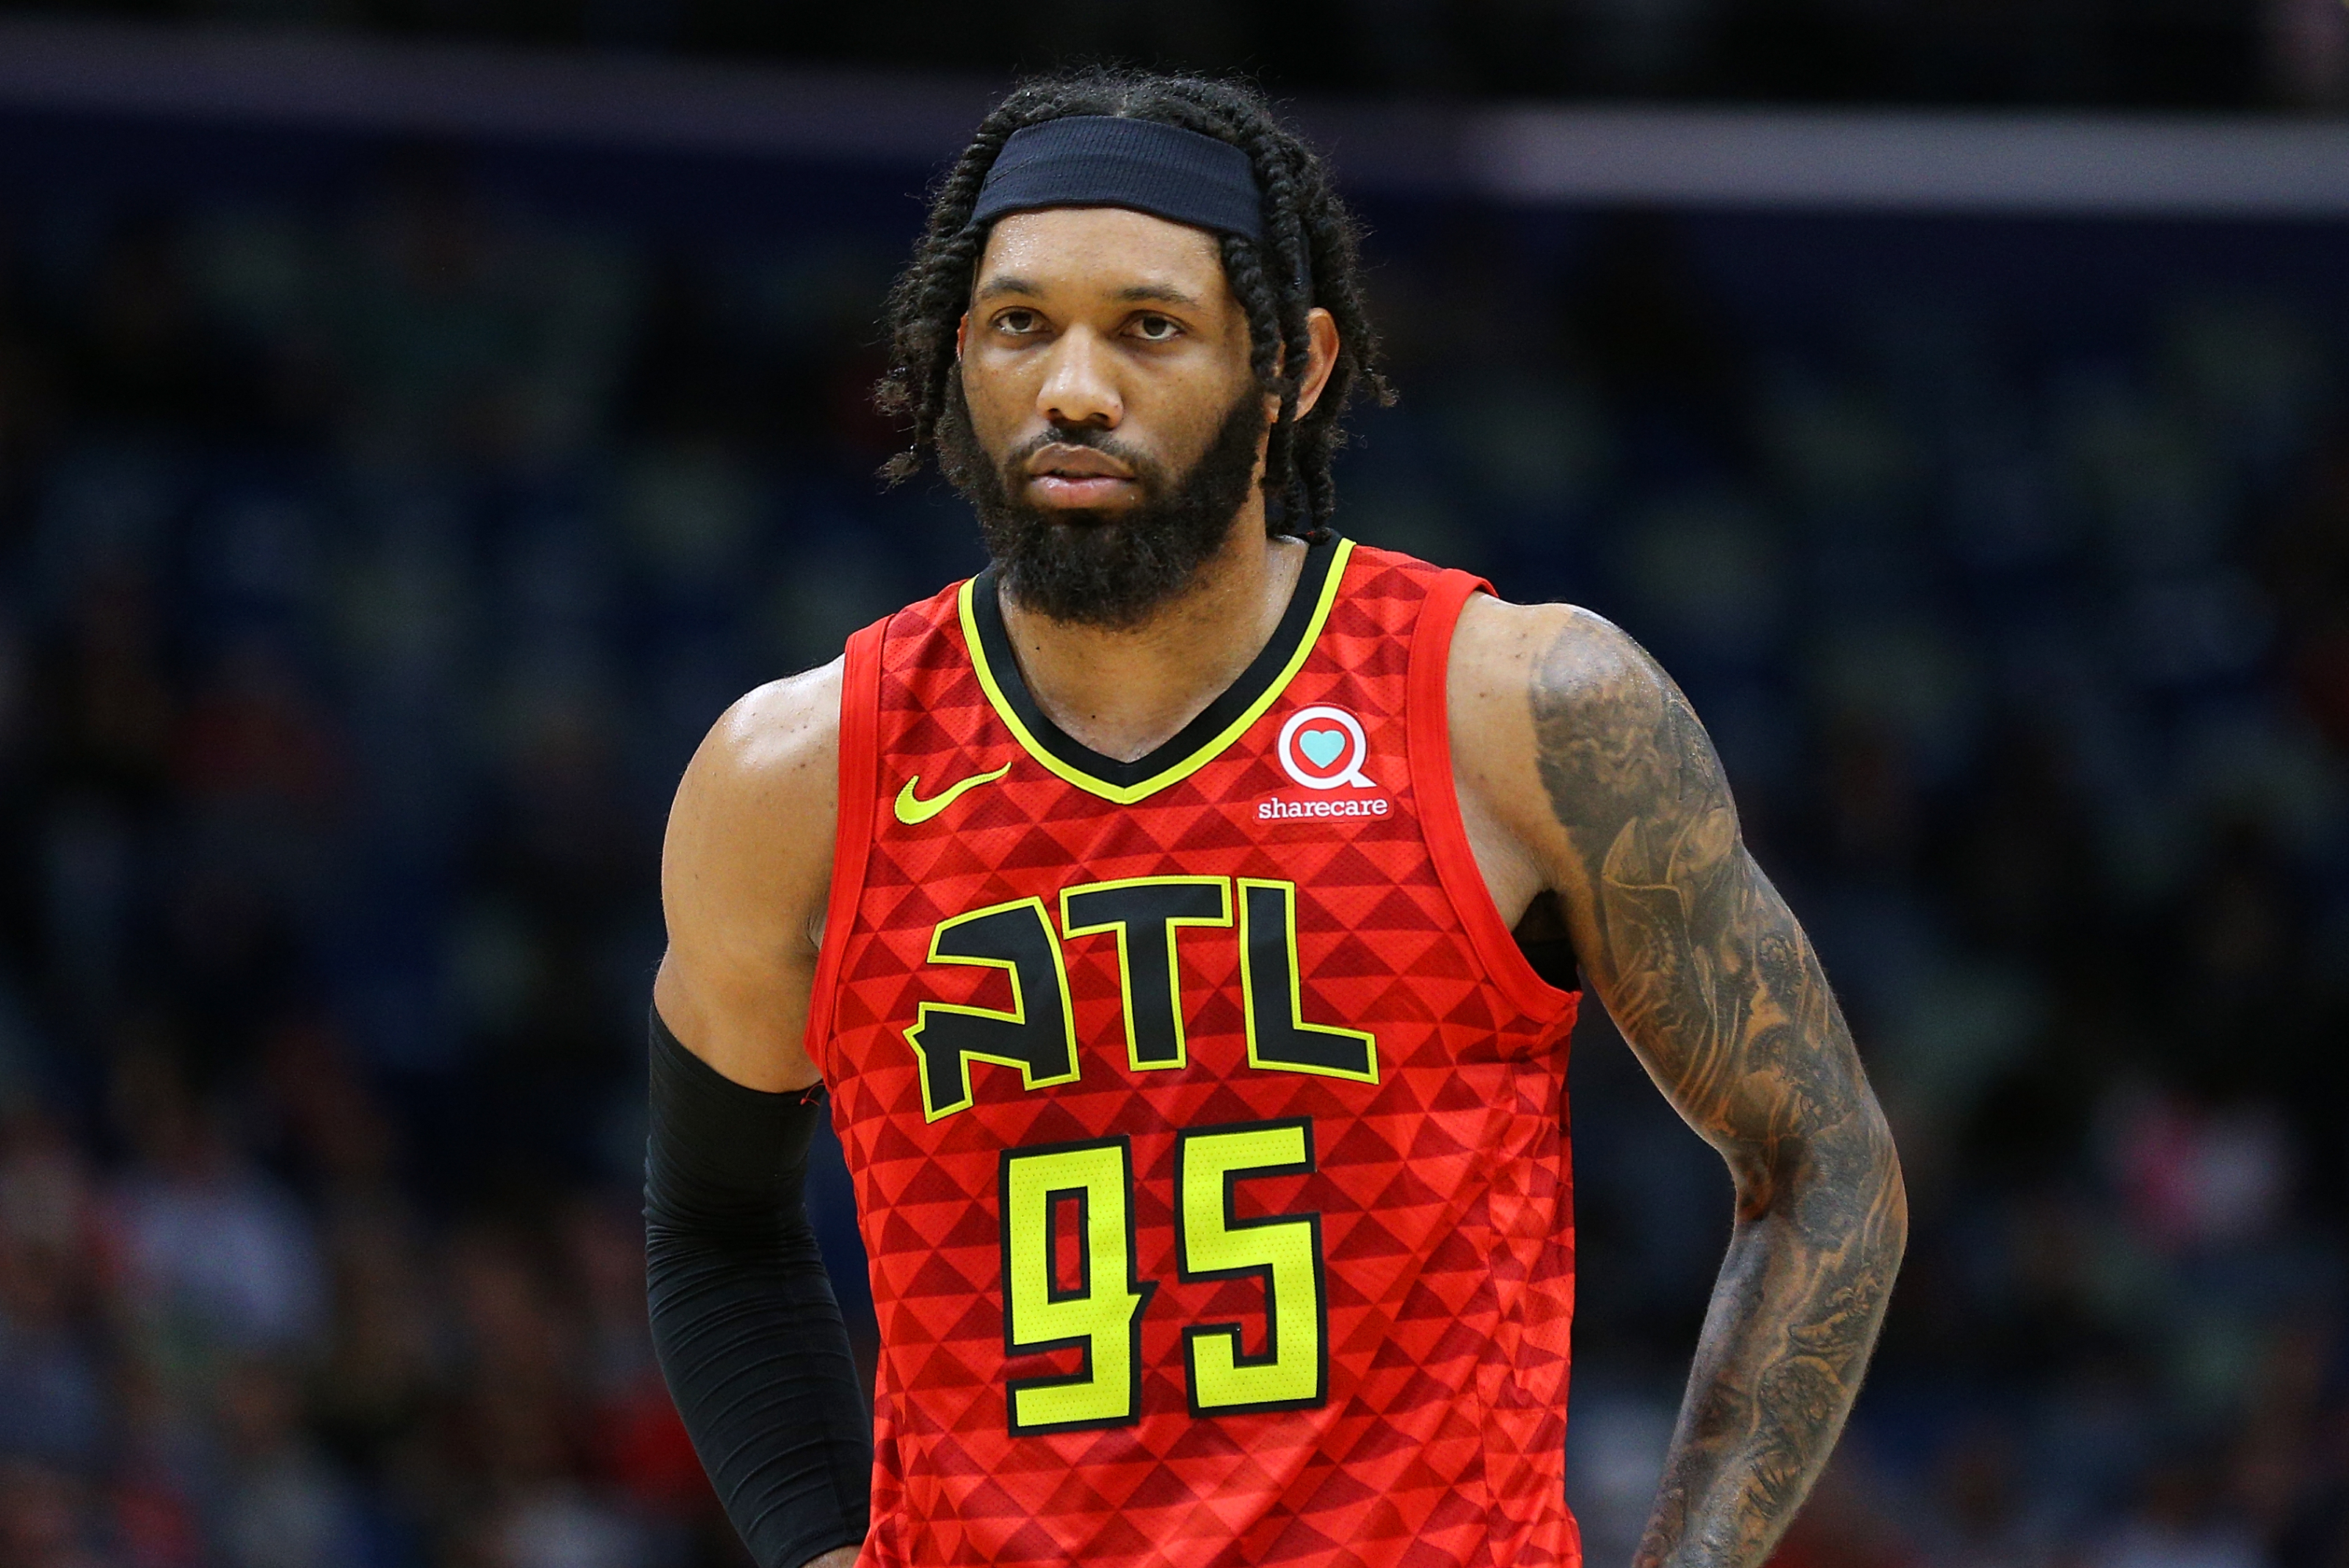 A look at DeAndre' Bembry's early play and where he might fit in